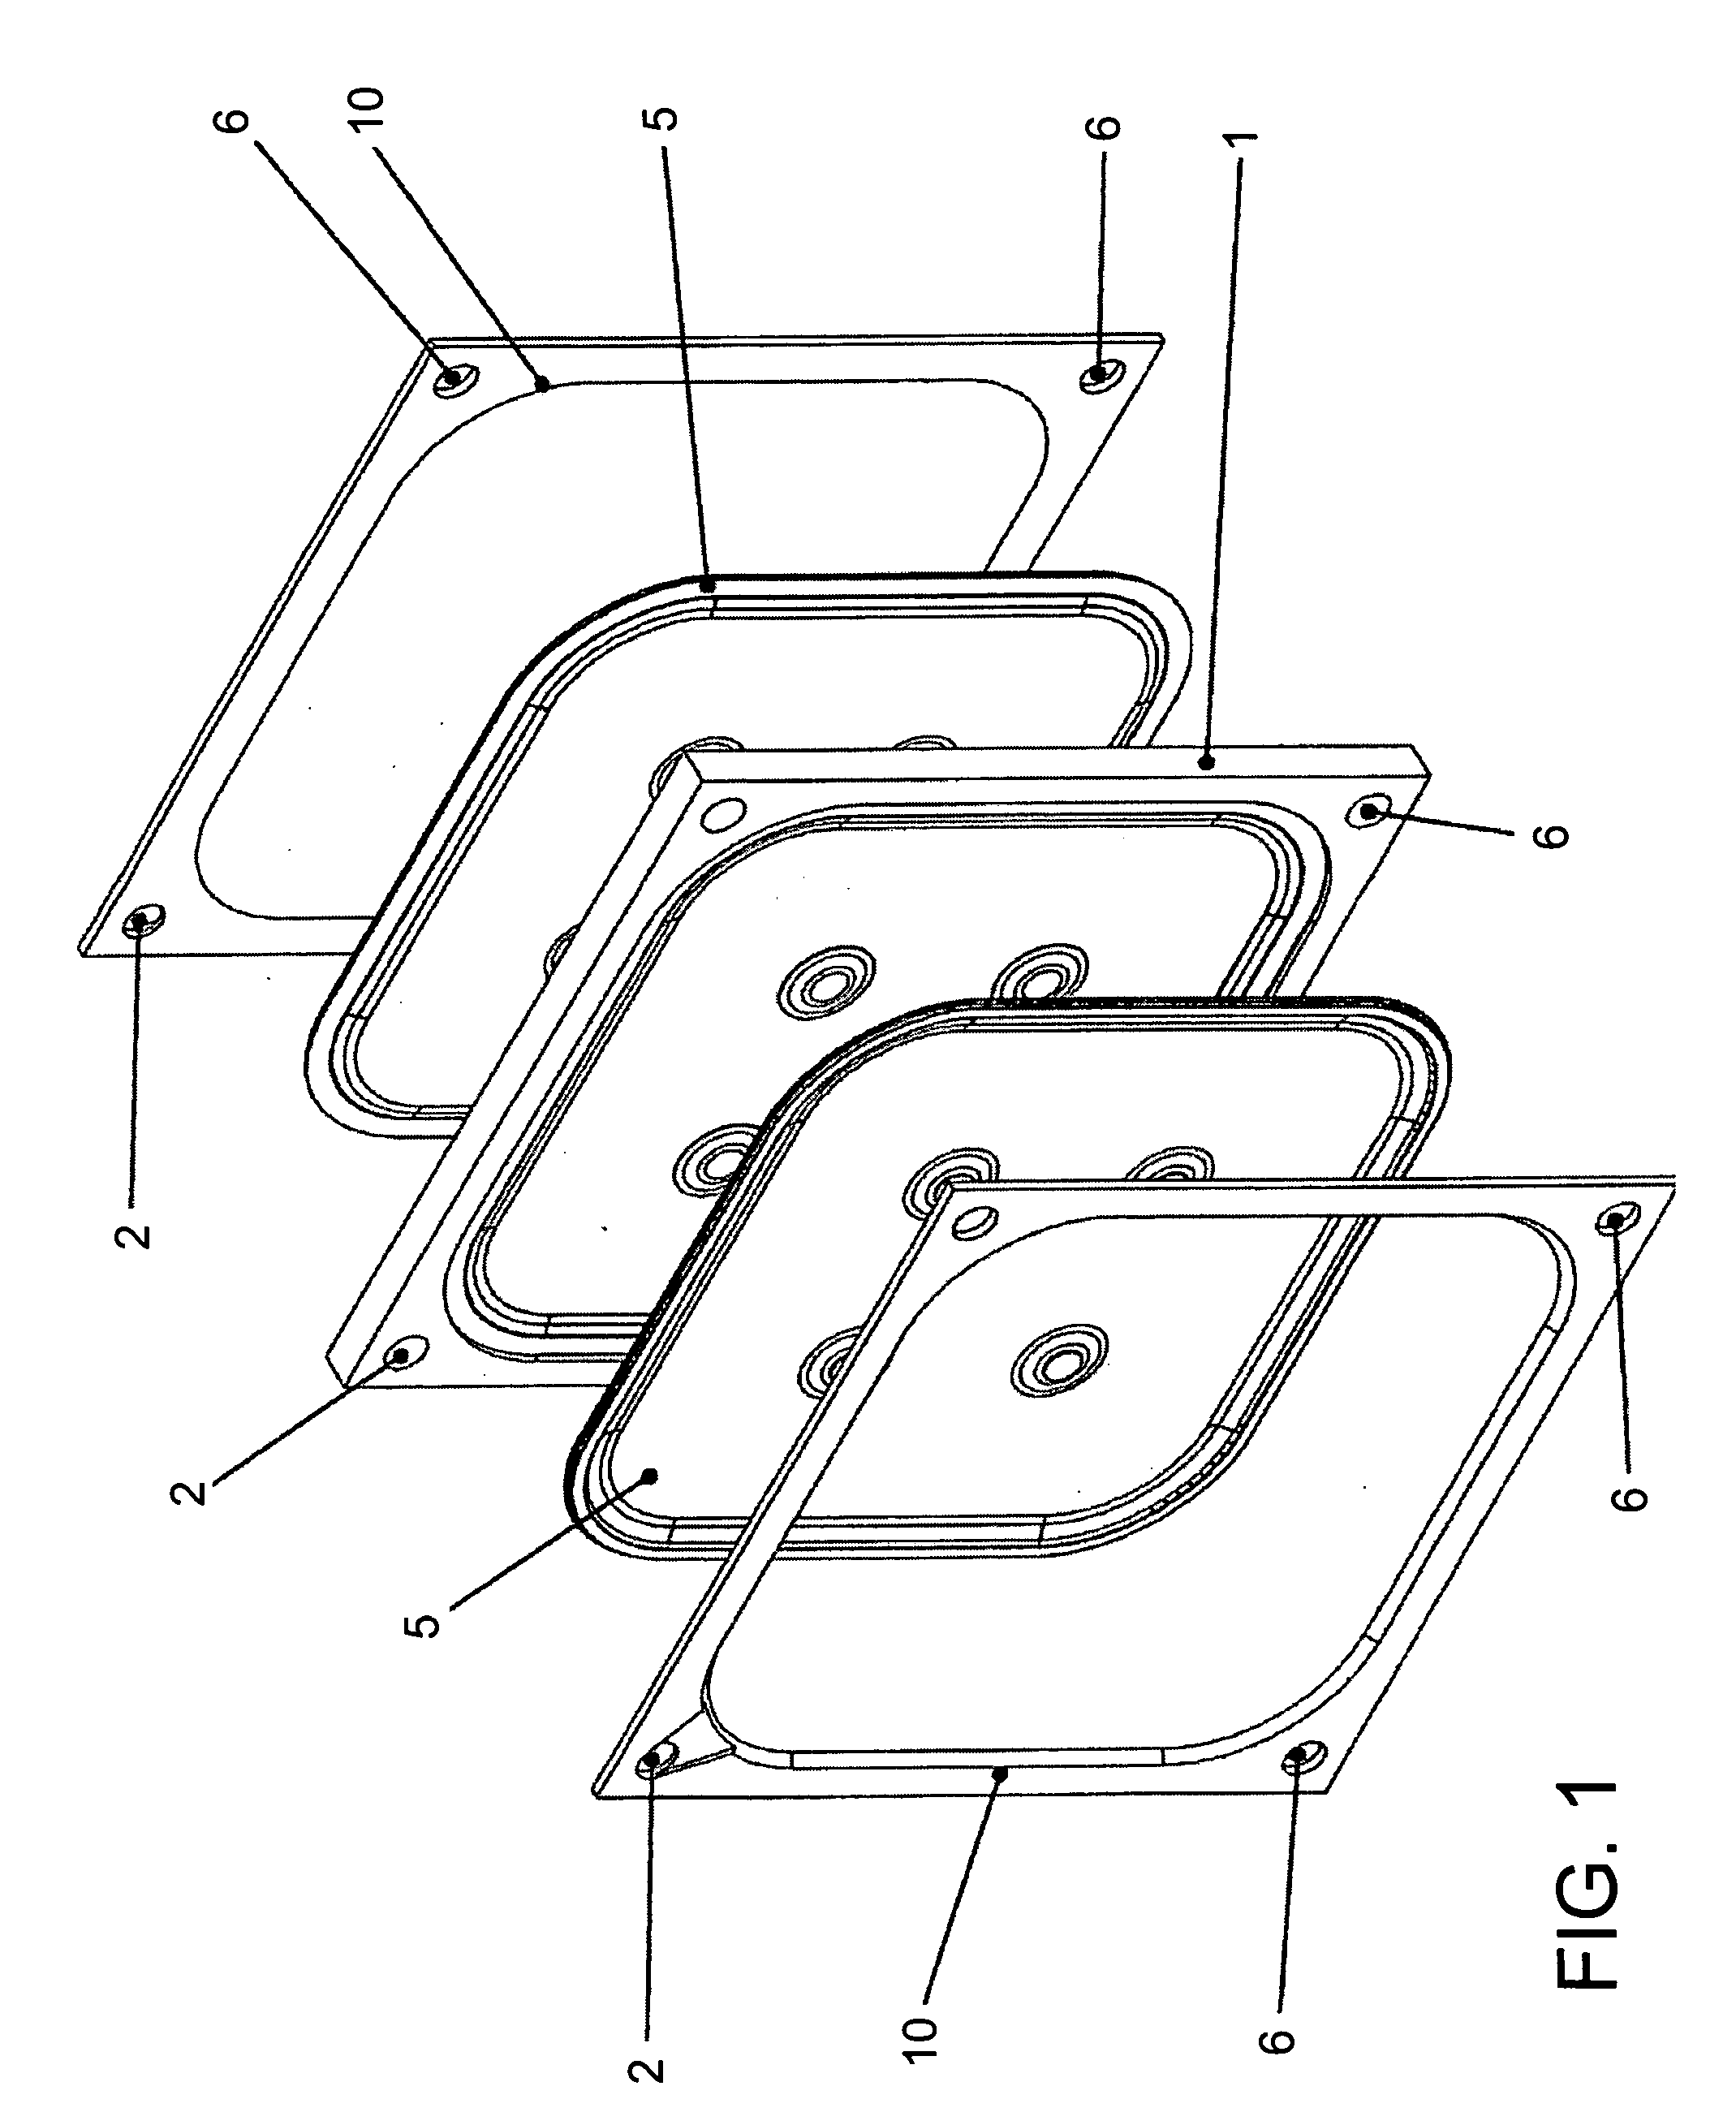 Filter plate assembly